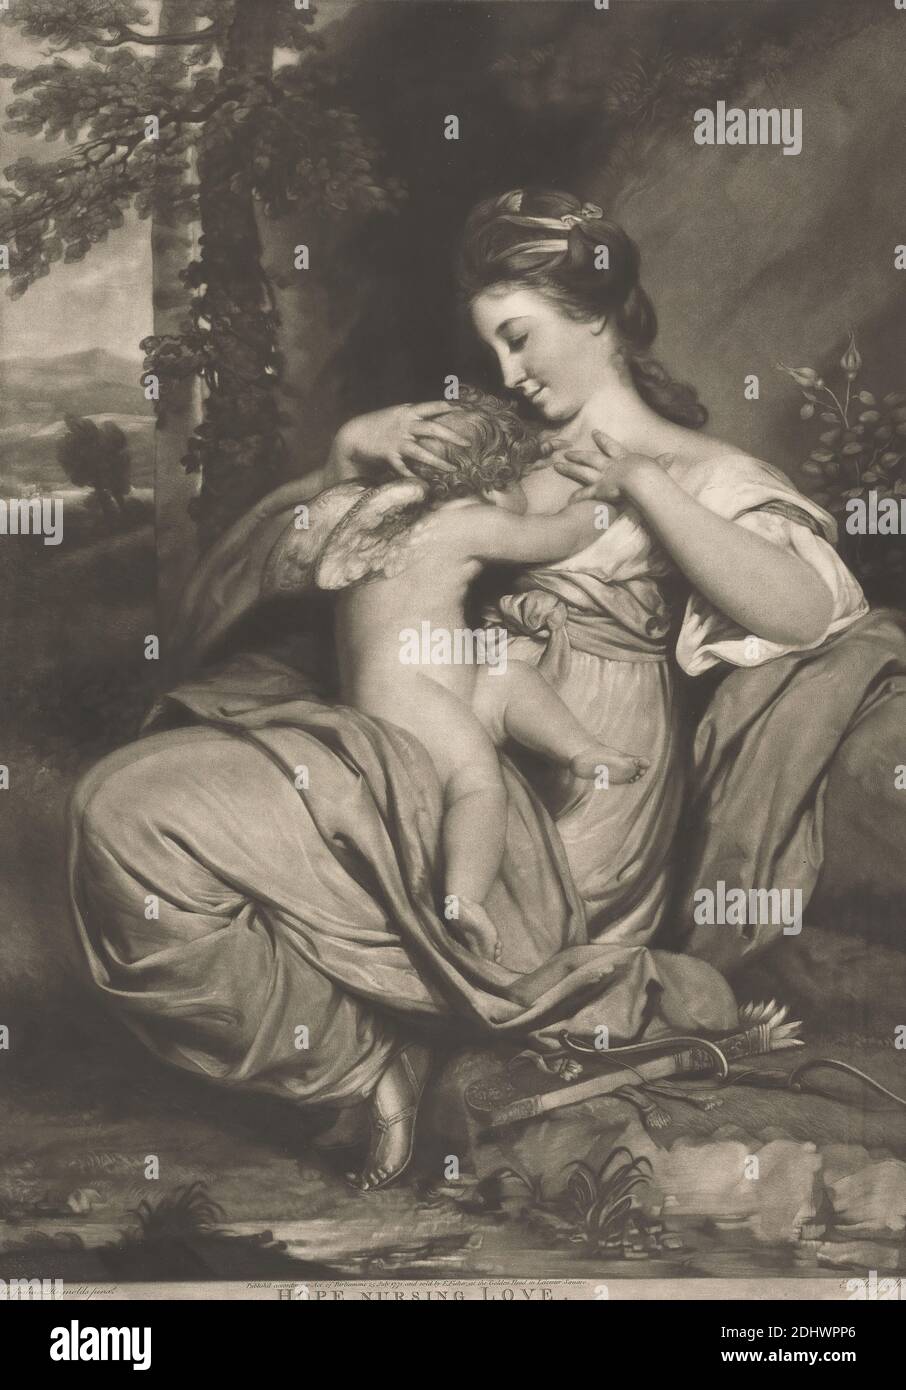 Miss Morris as 'Hope Nursing Love', Print made by Edward Fisher, 1722–1785, British, after Sir Joshua Reynolds RA, 1723–1792, British, 1771, Mezzotint ( 2nd state ) on medium, moderately textured, cream laid paper, Sheet: 26 1/2 × 19 1/4 inches (67.3 × 48.9 cm), Plate: 20 1/8 × 14 1/4 inches (51.1 × 36.2 cm), and Image: 19 7/8 × 14 1/8 inches (50.5 × 35.9 cm), arrows, bow, dress, hope, Hope, 'Spes'; 'Speranza divina e certa' (Ripa)  one of the Three Theological Virtues - MM - Virtues triumphant, love, mountains, nursing, suckling, portrait, religious and mythological subject, ribbon, rock Stock Photo